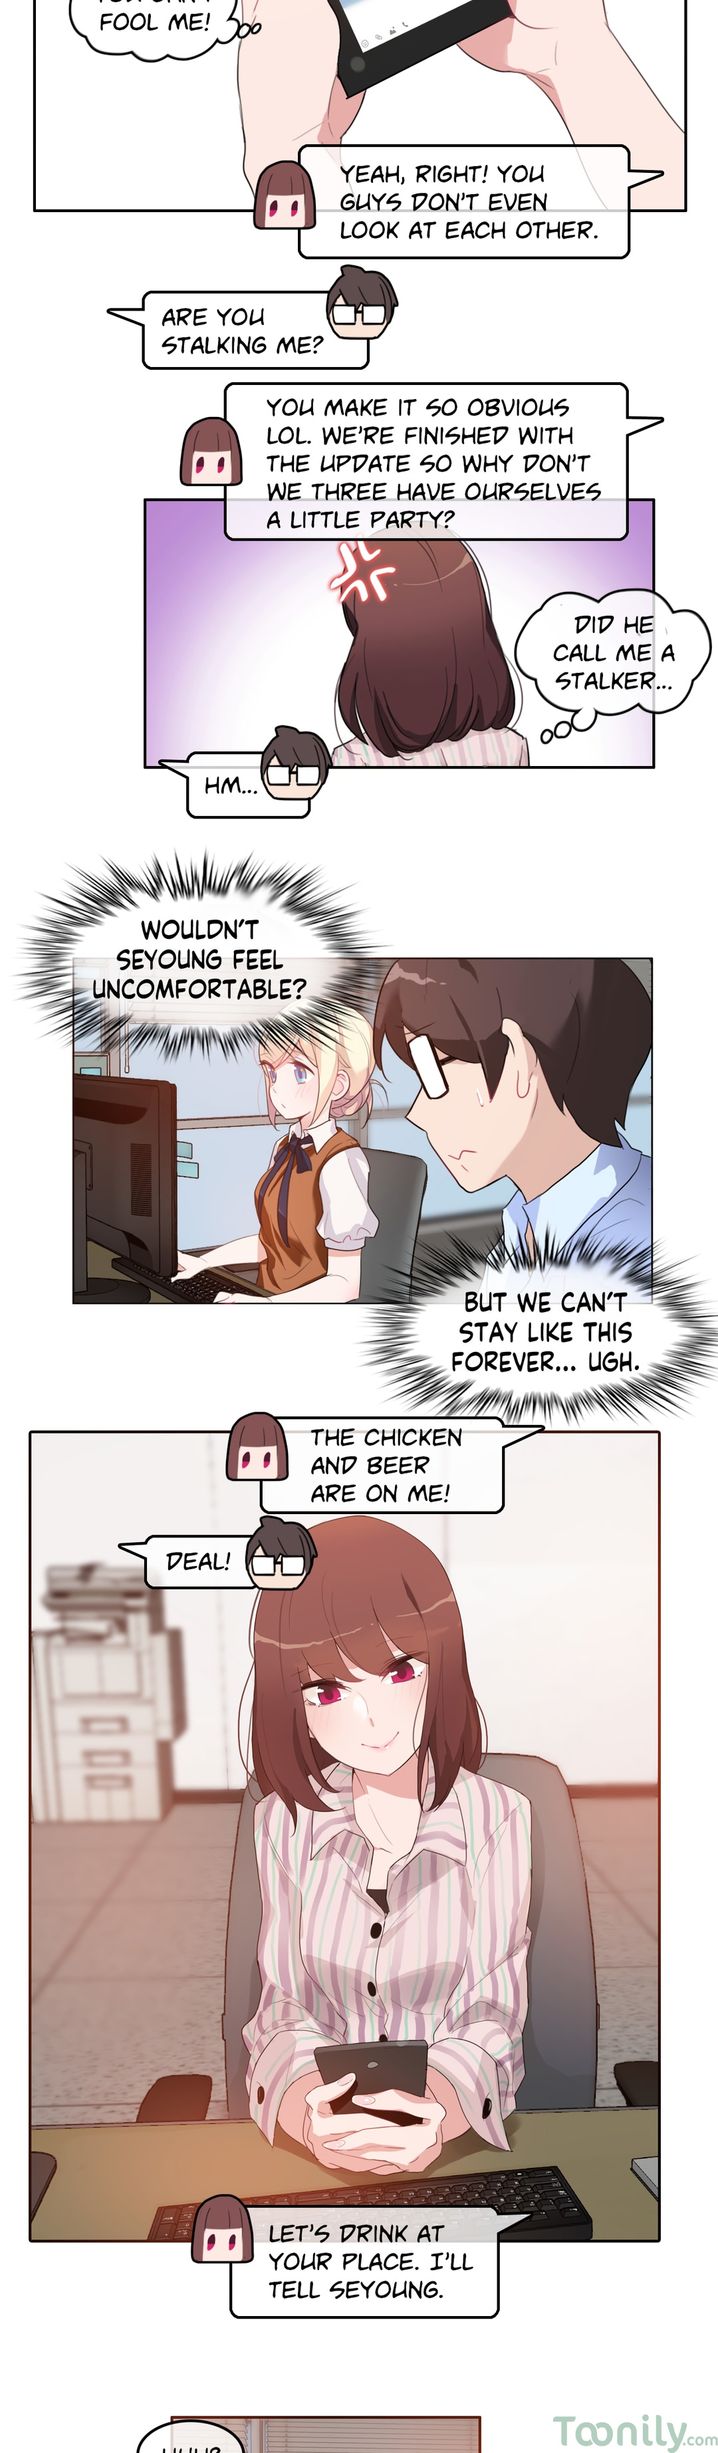 A Pervert’s Daily Life - Chapter 9 Page 4